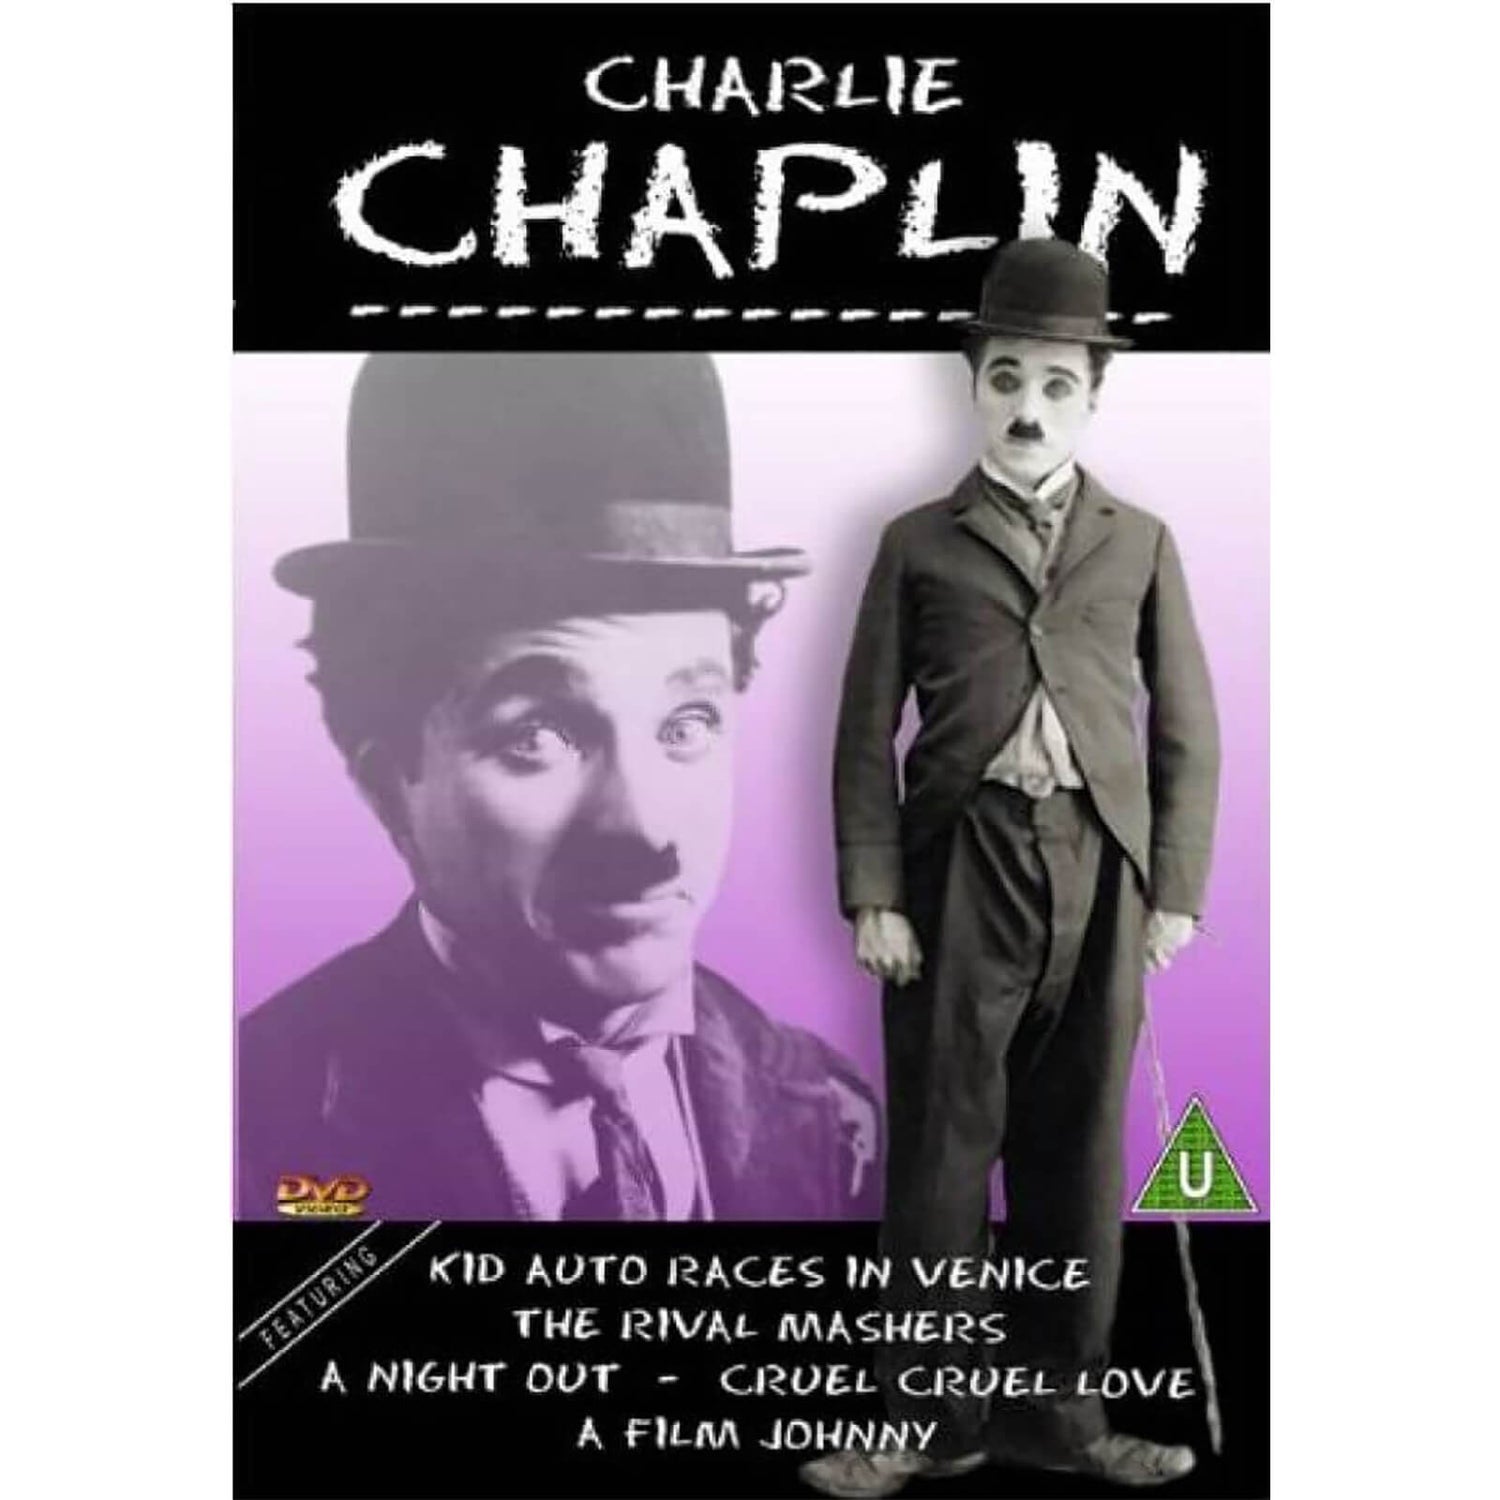 CHARLIE CHAPLIN COLLECTION 1